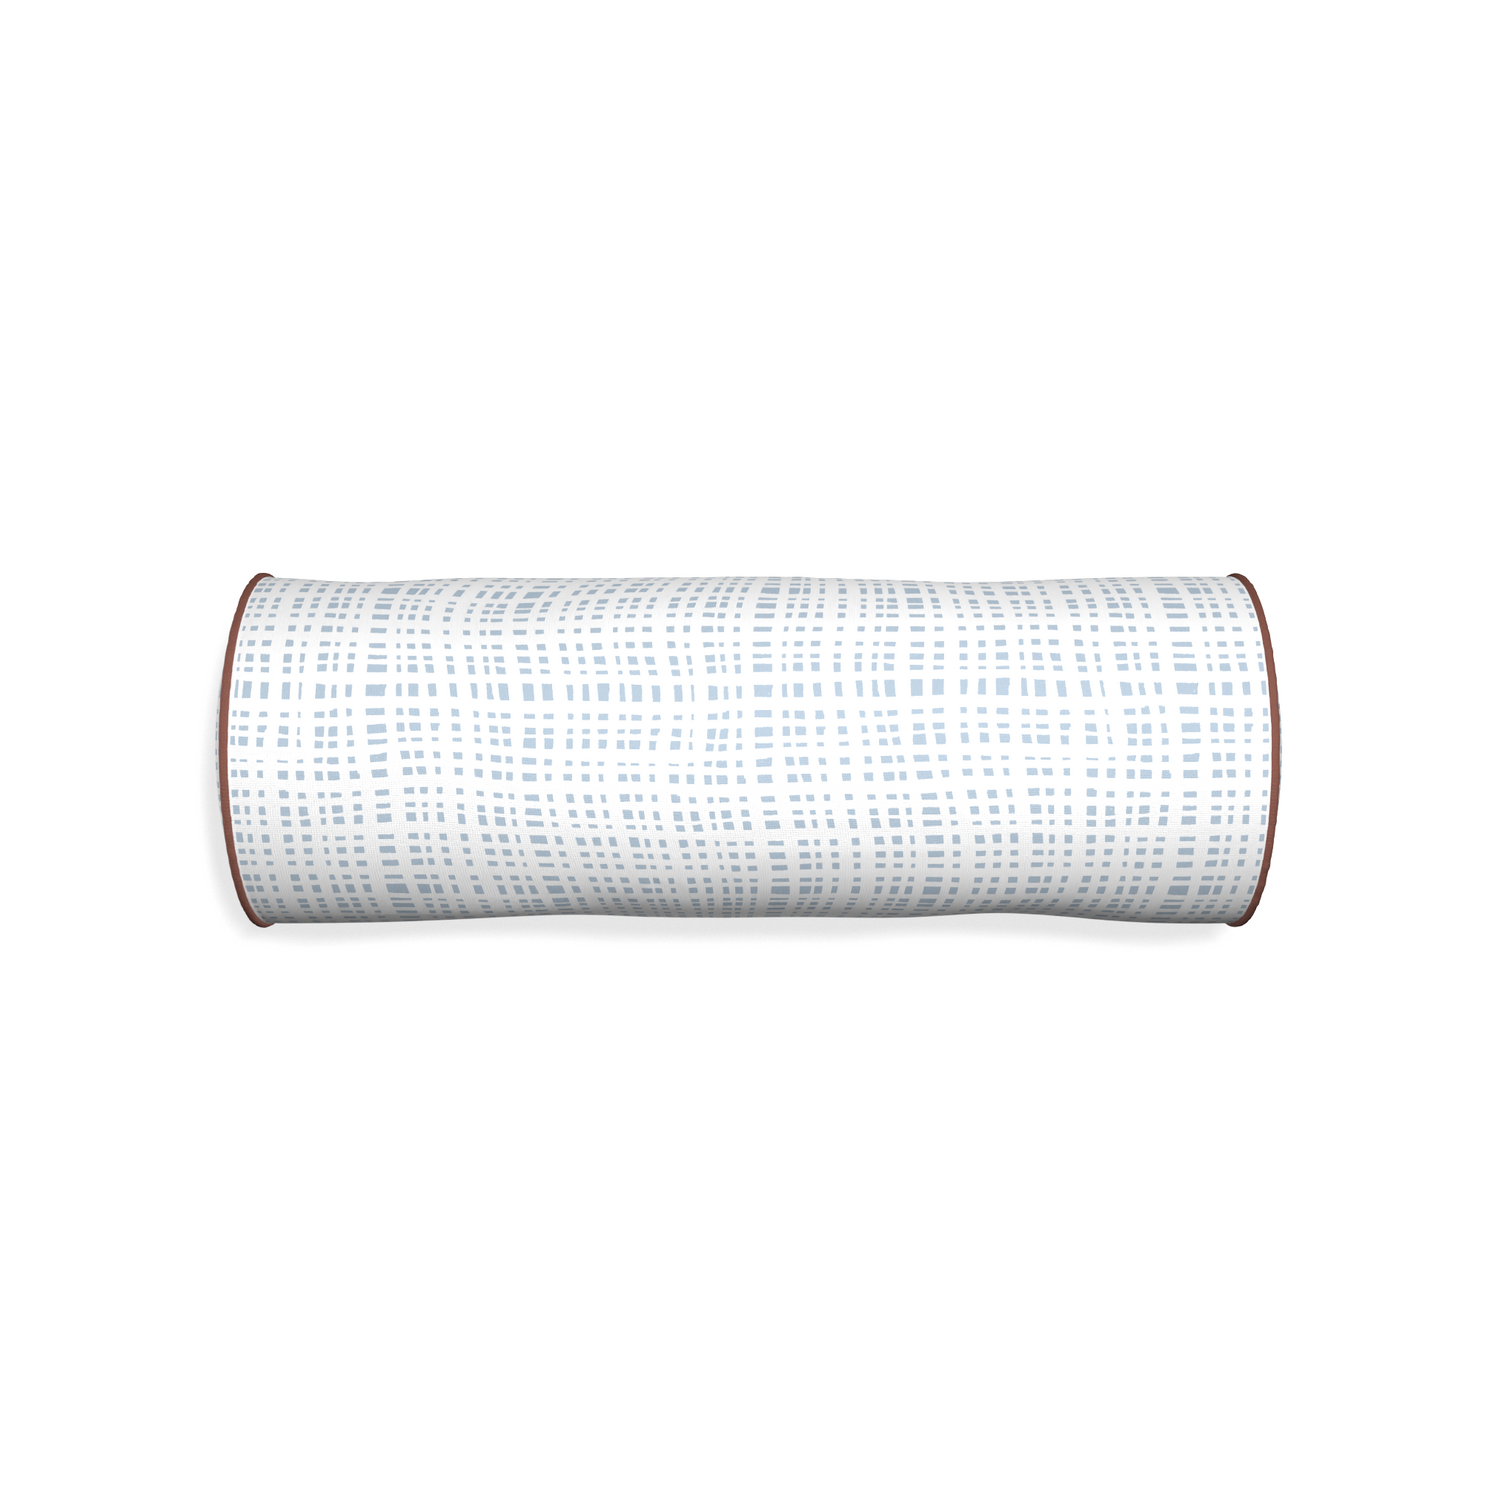 Bolster ginger custom plaid sky bluepillow with w piping on white background